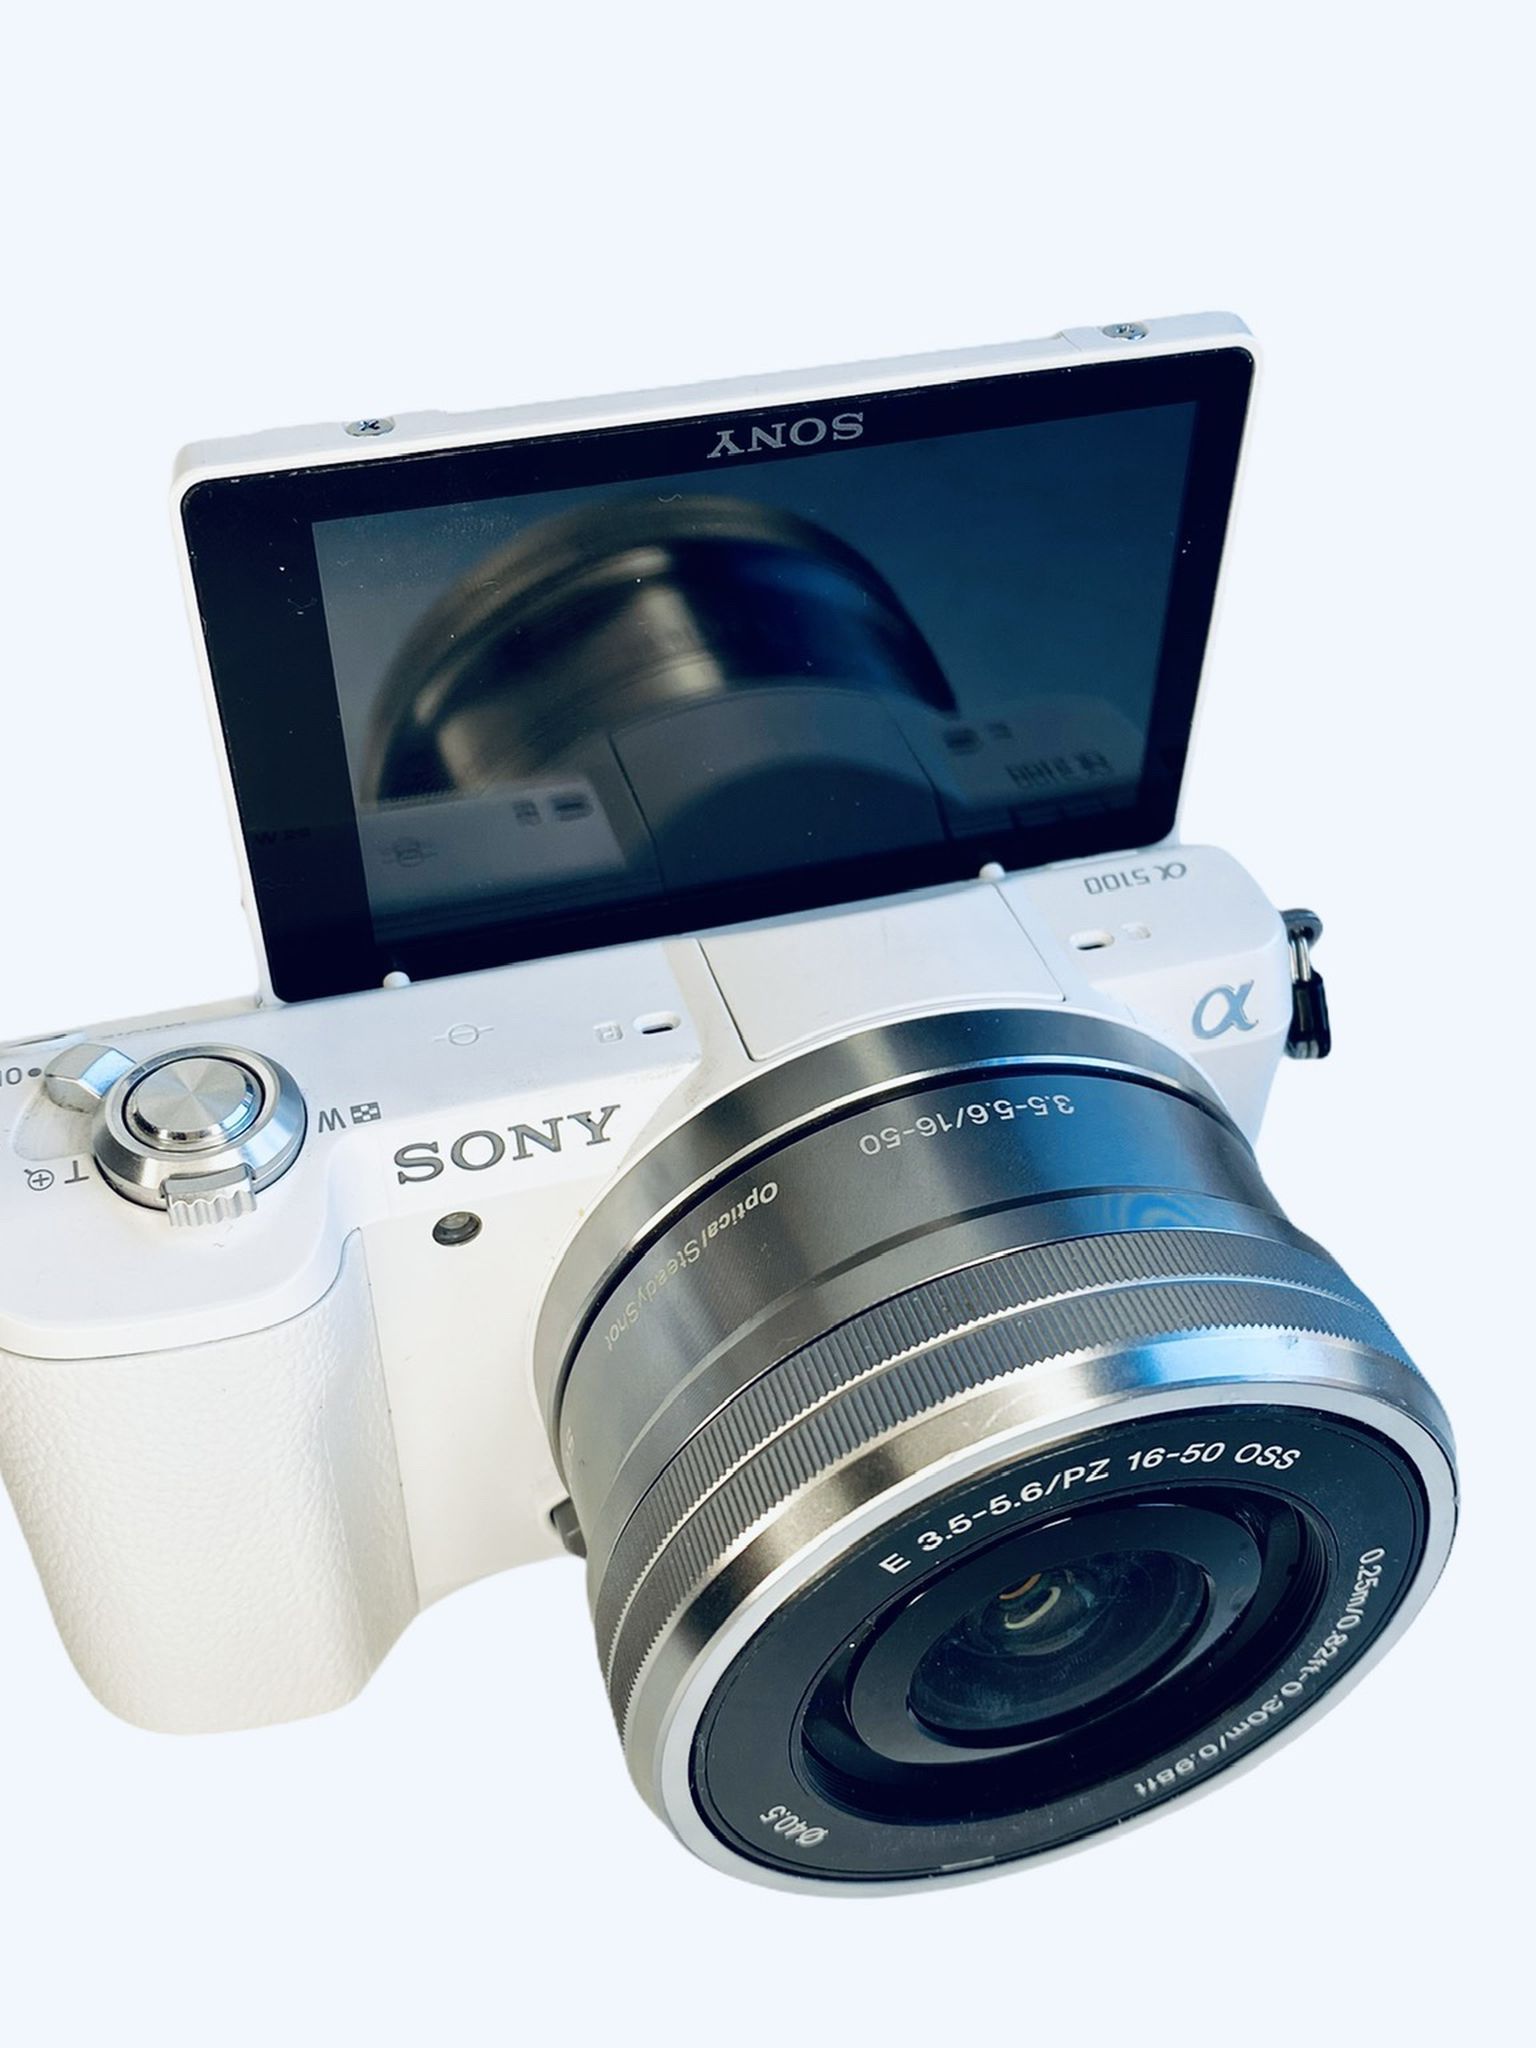 Sony alpha A5100 16-50mm Mirrorless Digital Camera with 3-Inch Flip Up LCD (White) - (No Warranty), Size: w/16-50 Lens SKU: 8429343 Model: ILCE5100L/